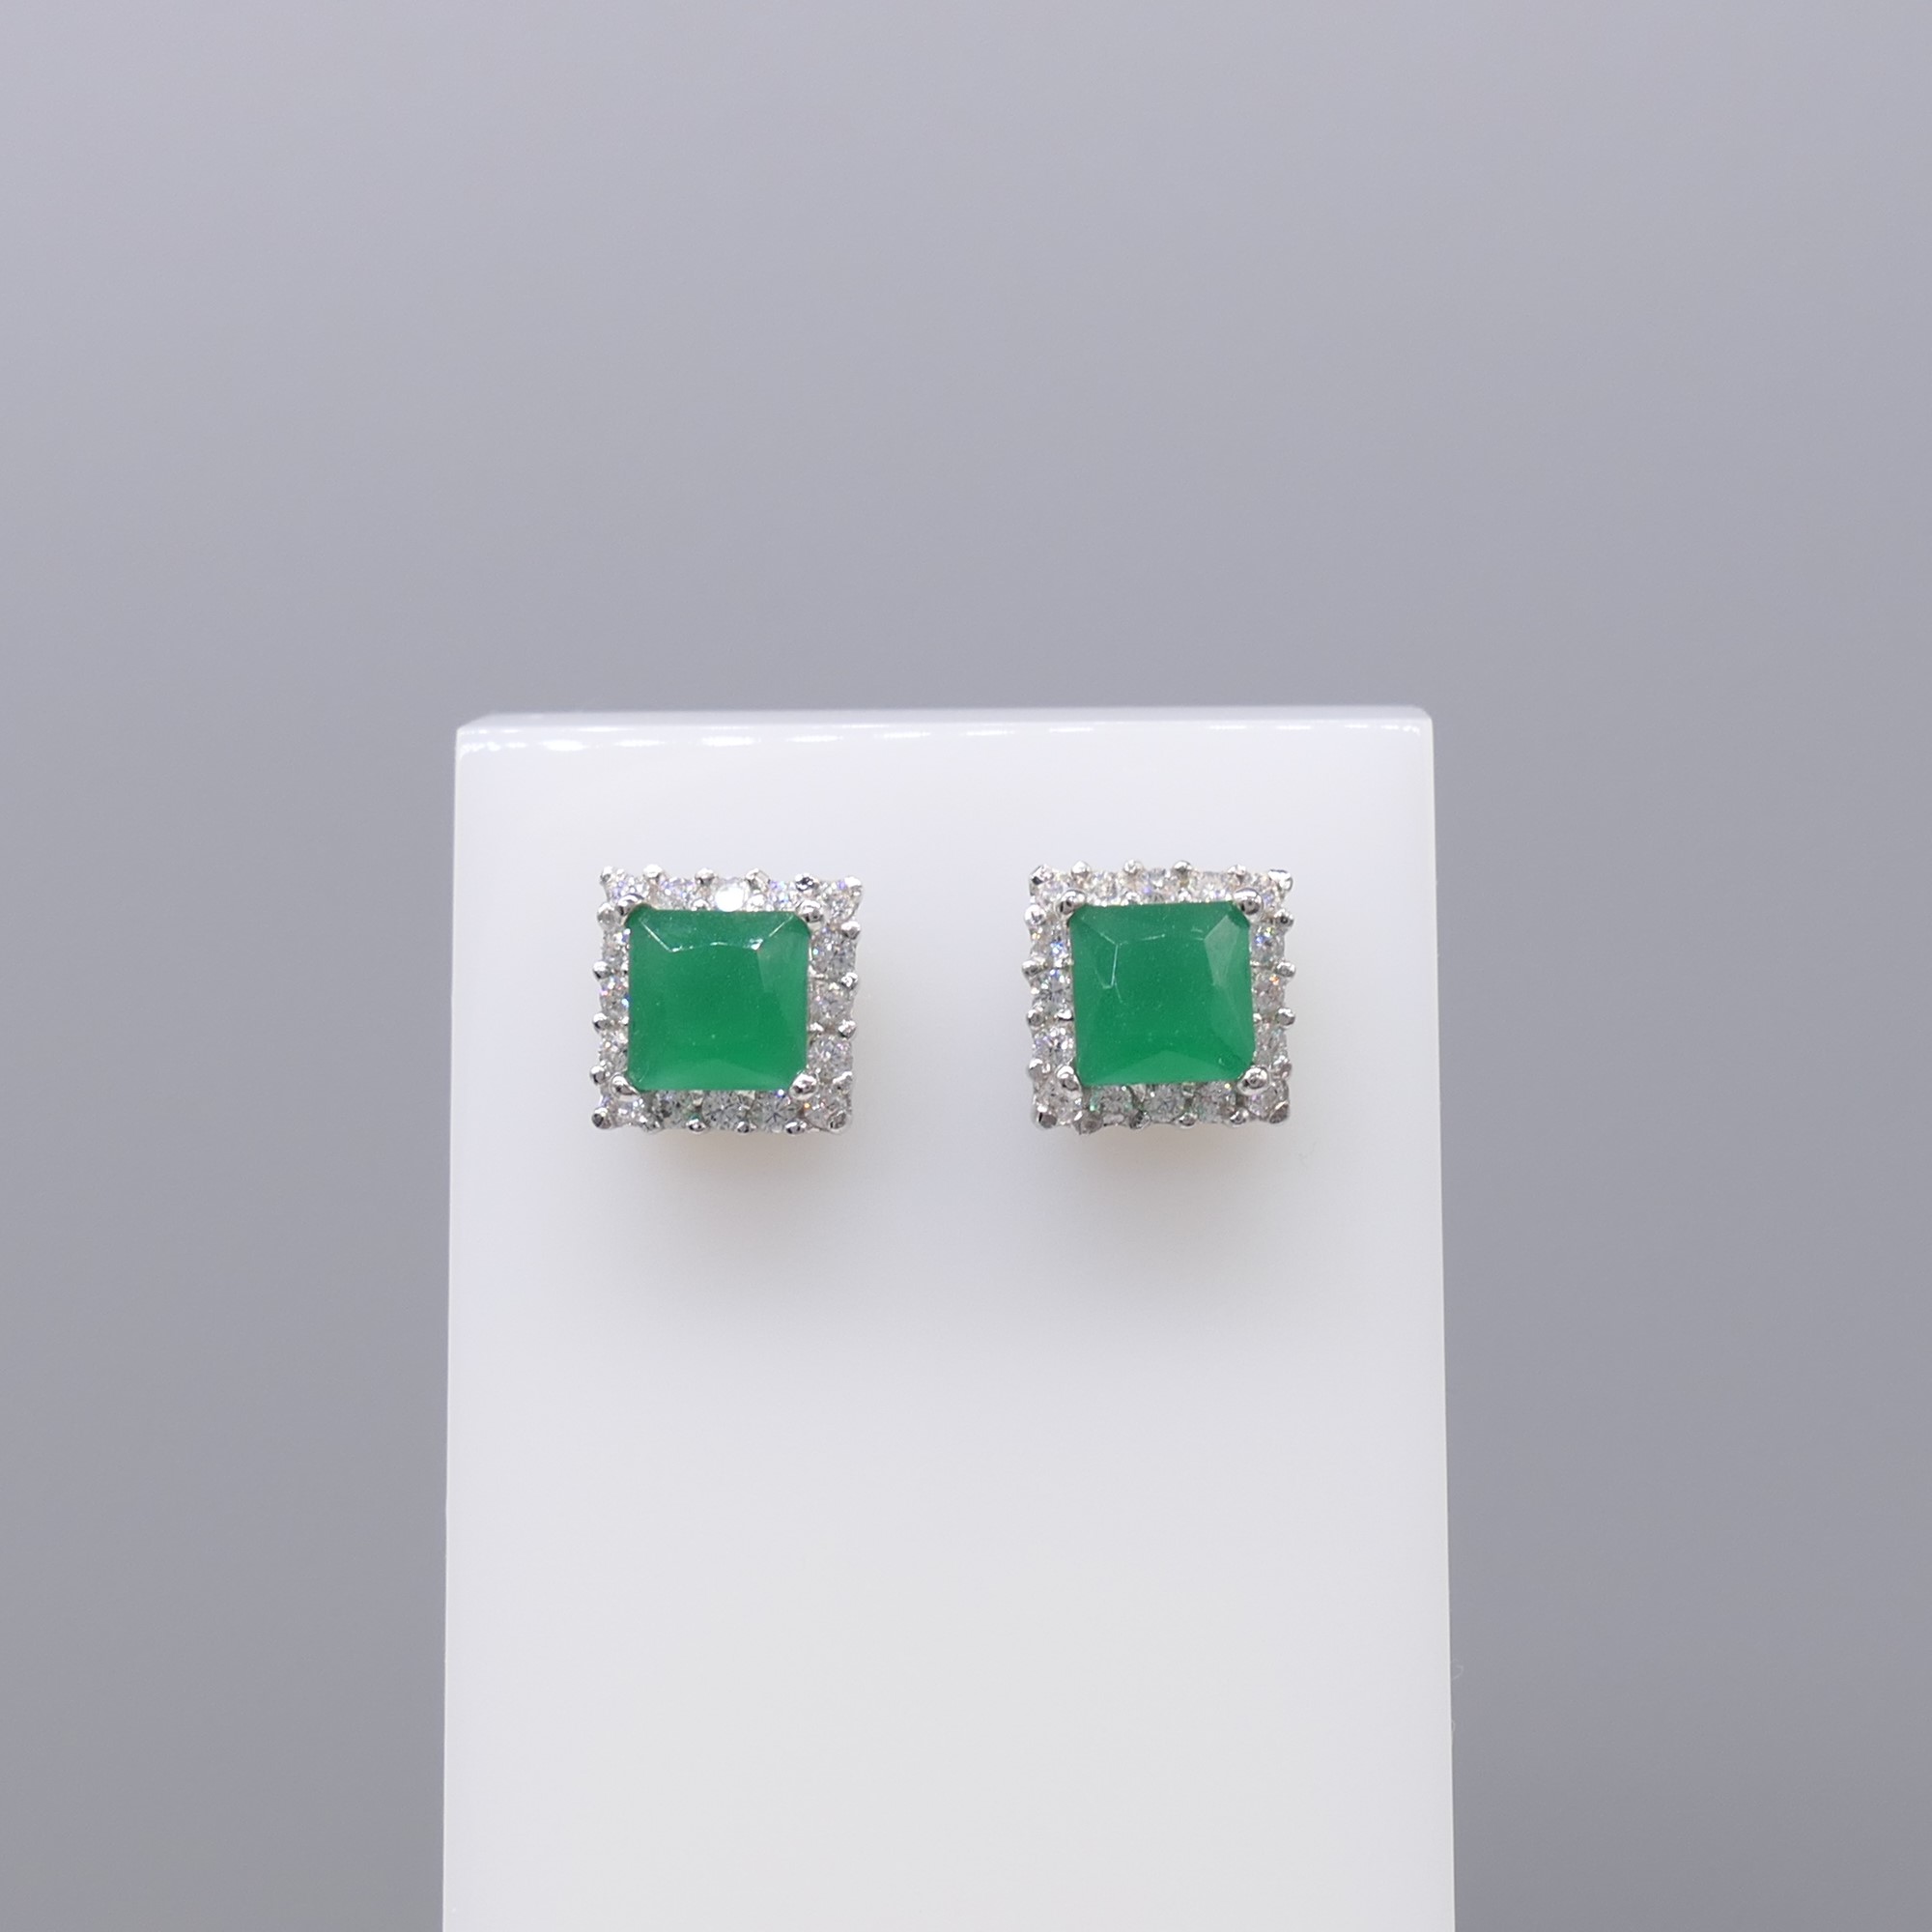 Pair of Silver Square-Set Green and White Cubic Zirconia Ear Studs - Image 6 of 6